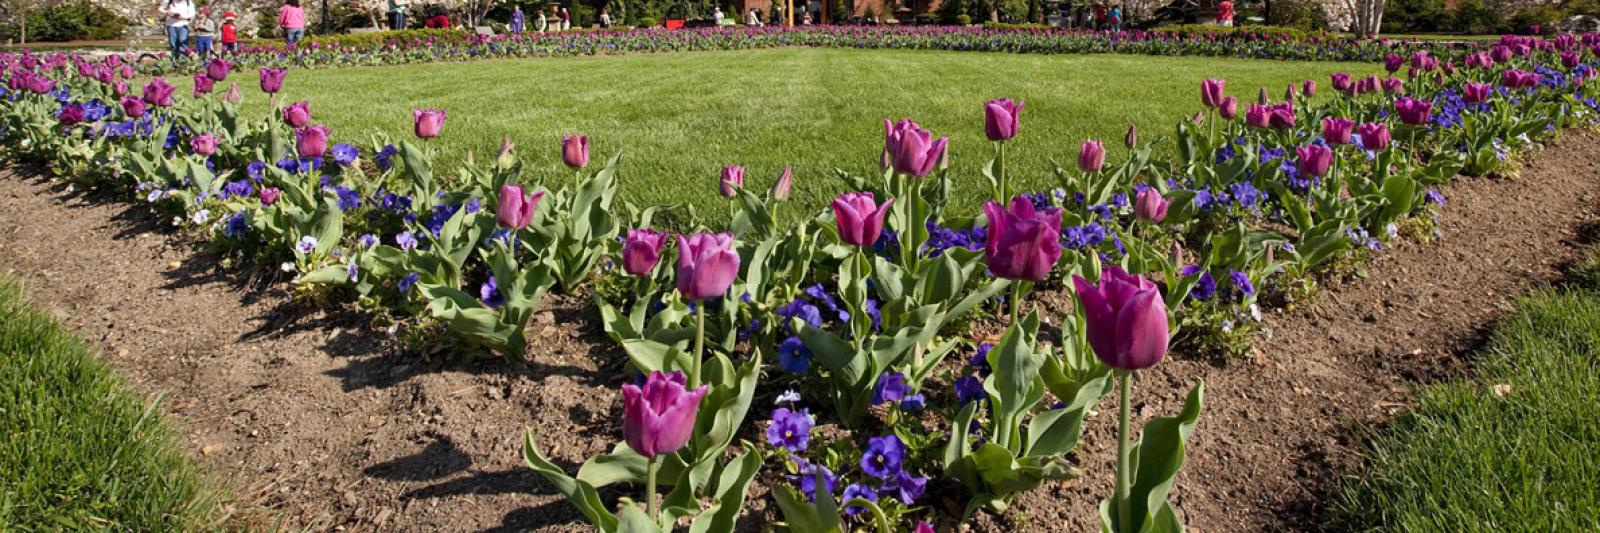 Photo of tulips and the exterior of the Smithsonian Castle.